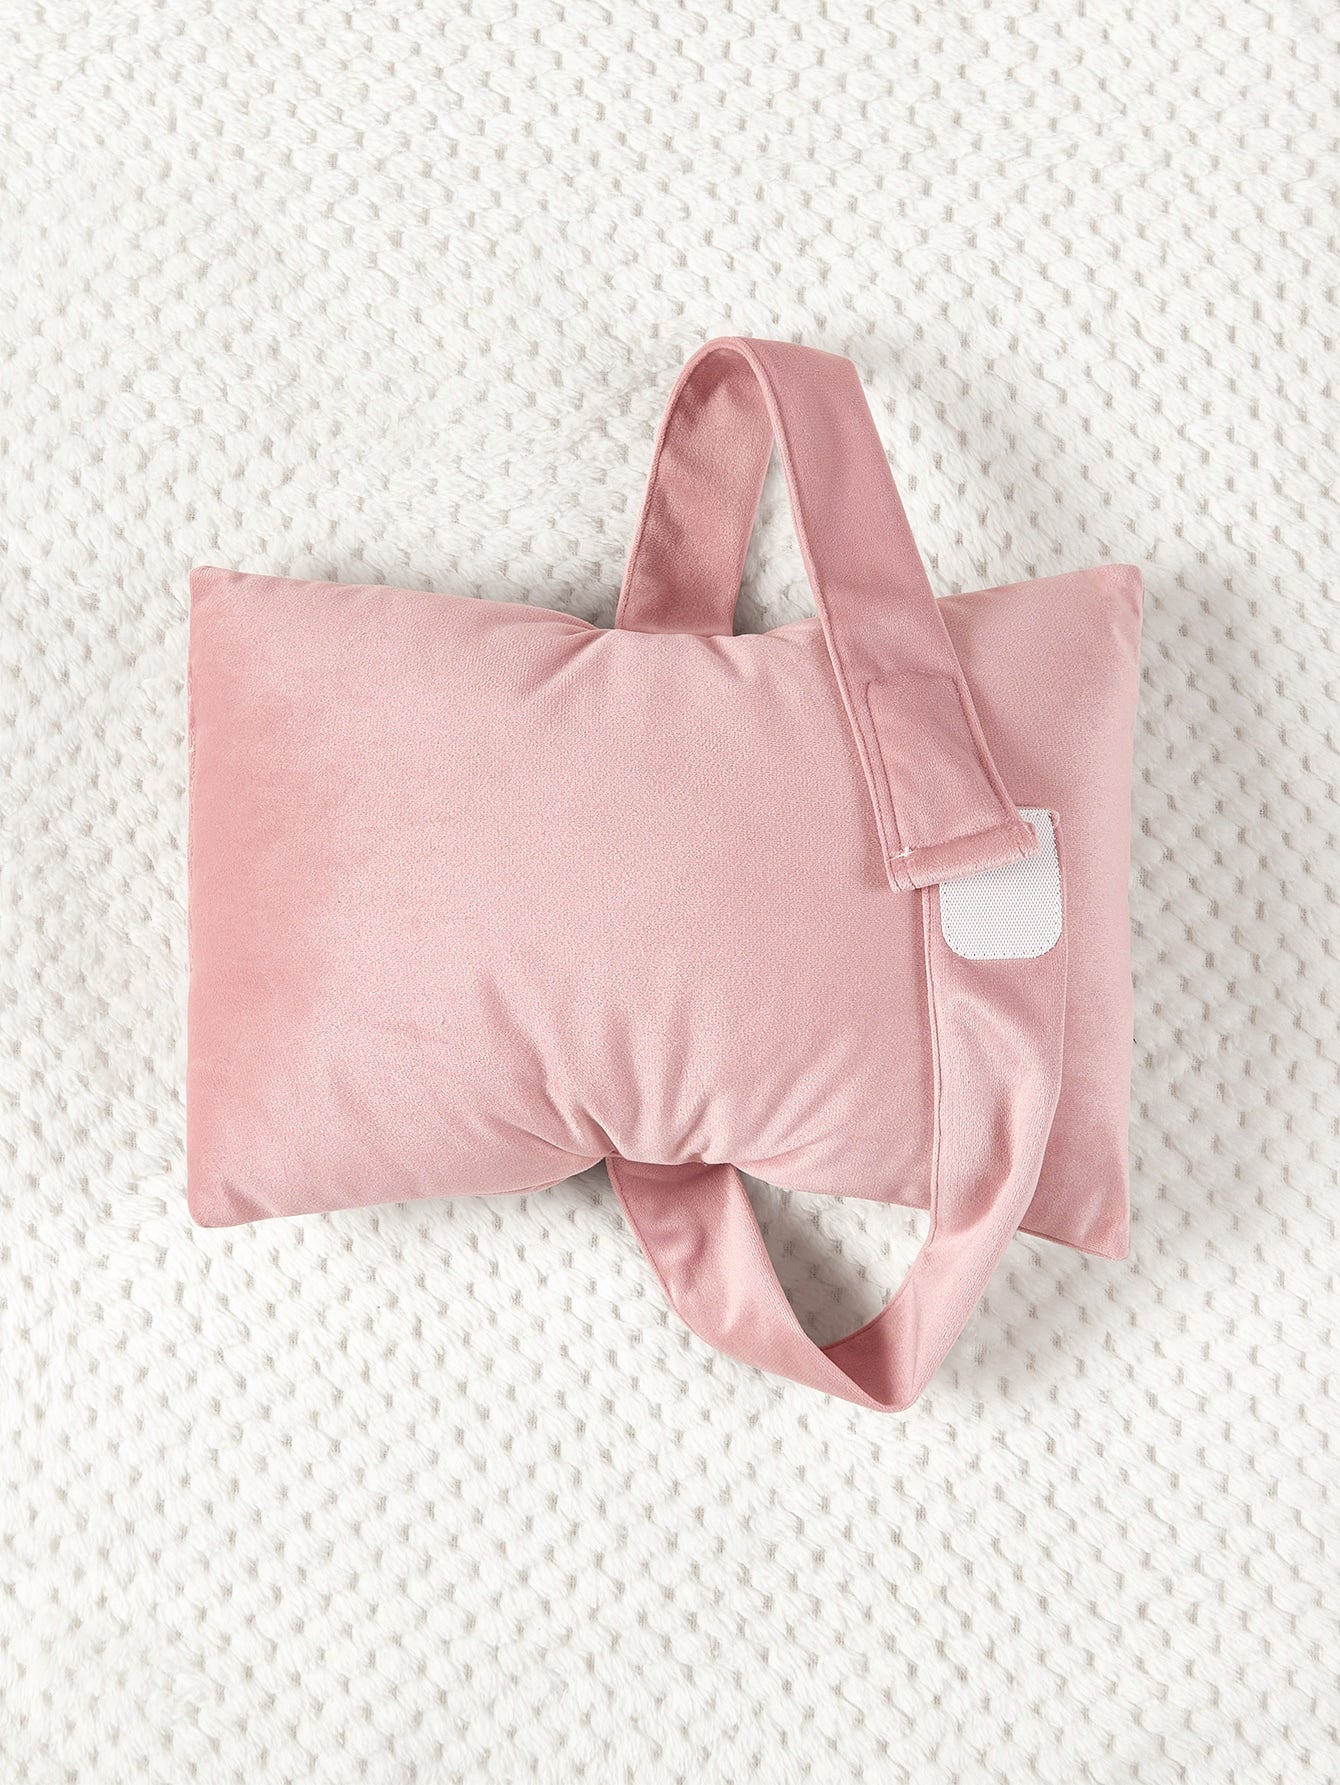 1pc Baby Bow Design Pillow